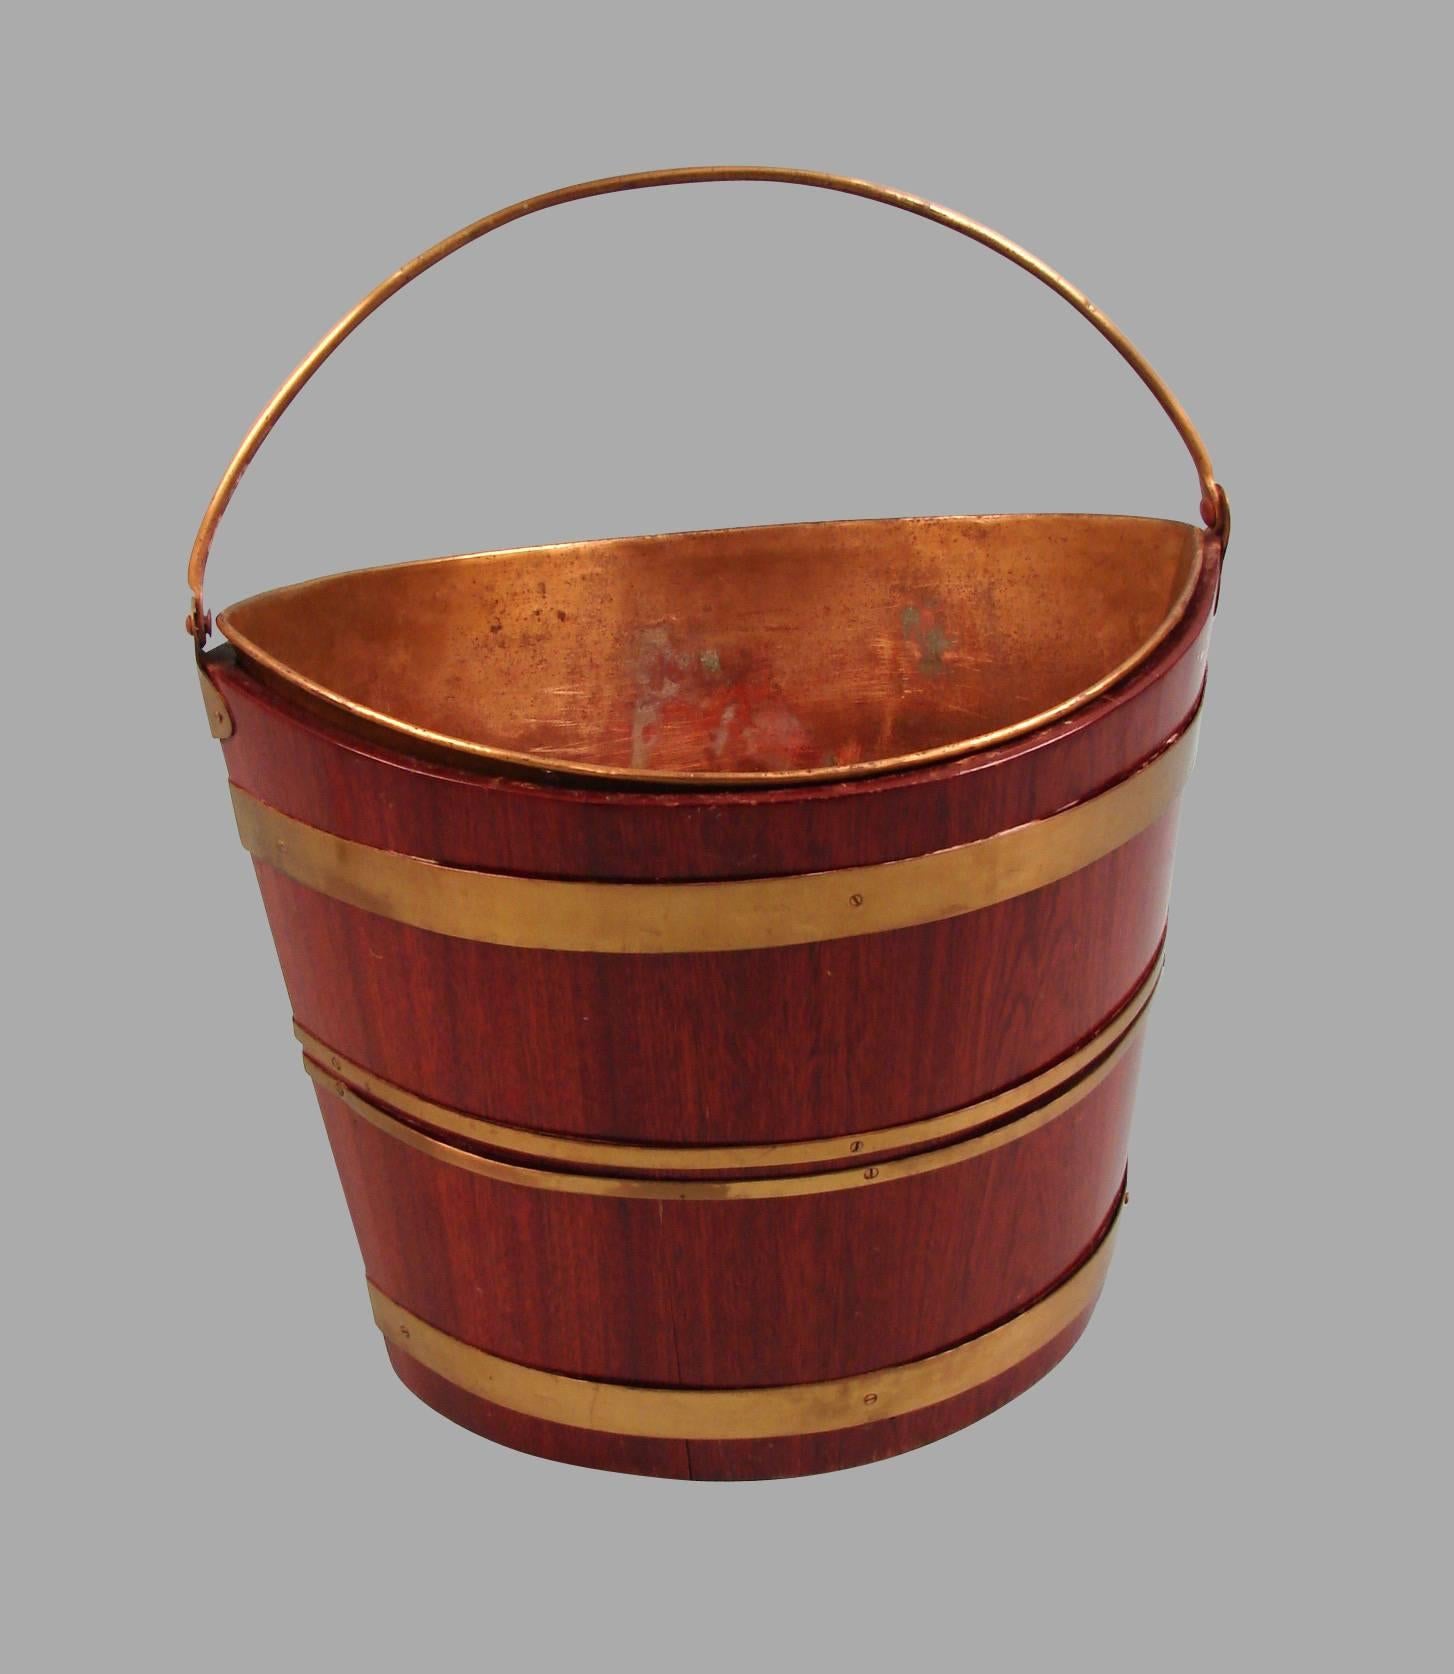 An English Regency period mahogany navette form brass-bound peat bucket with four brass bands and a brass liner, circa 1820.